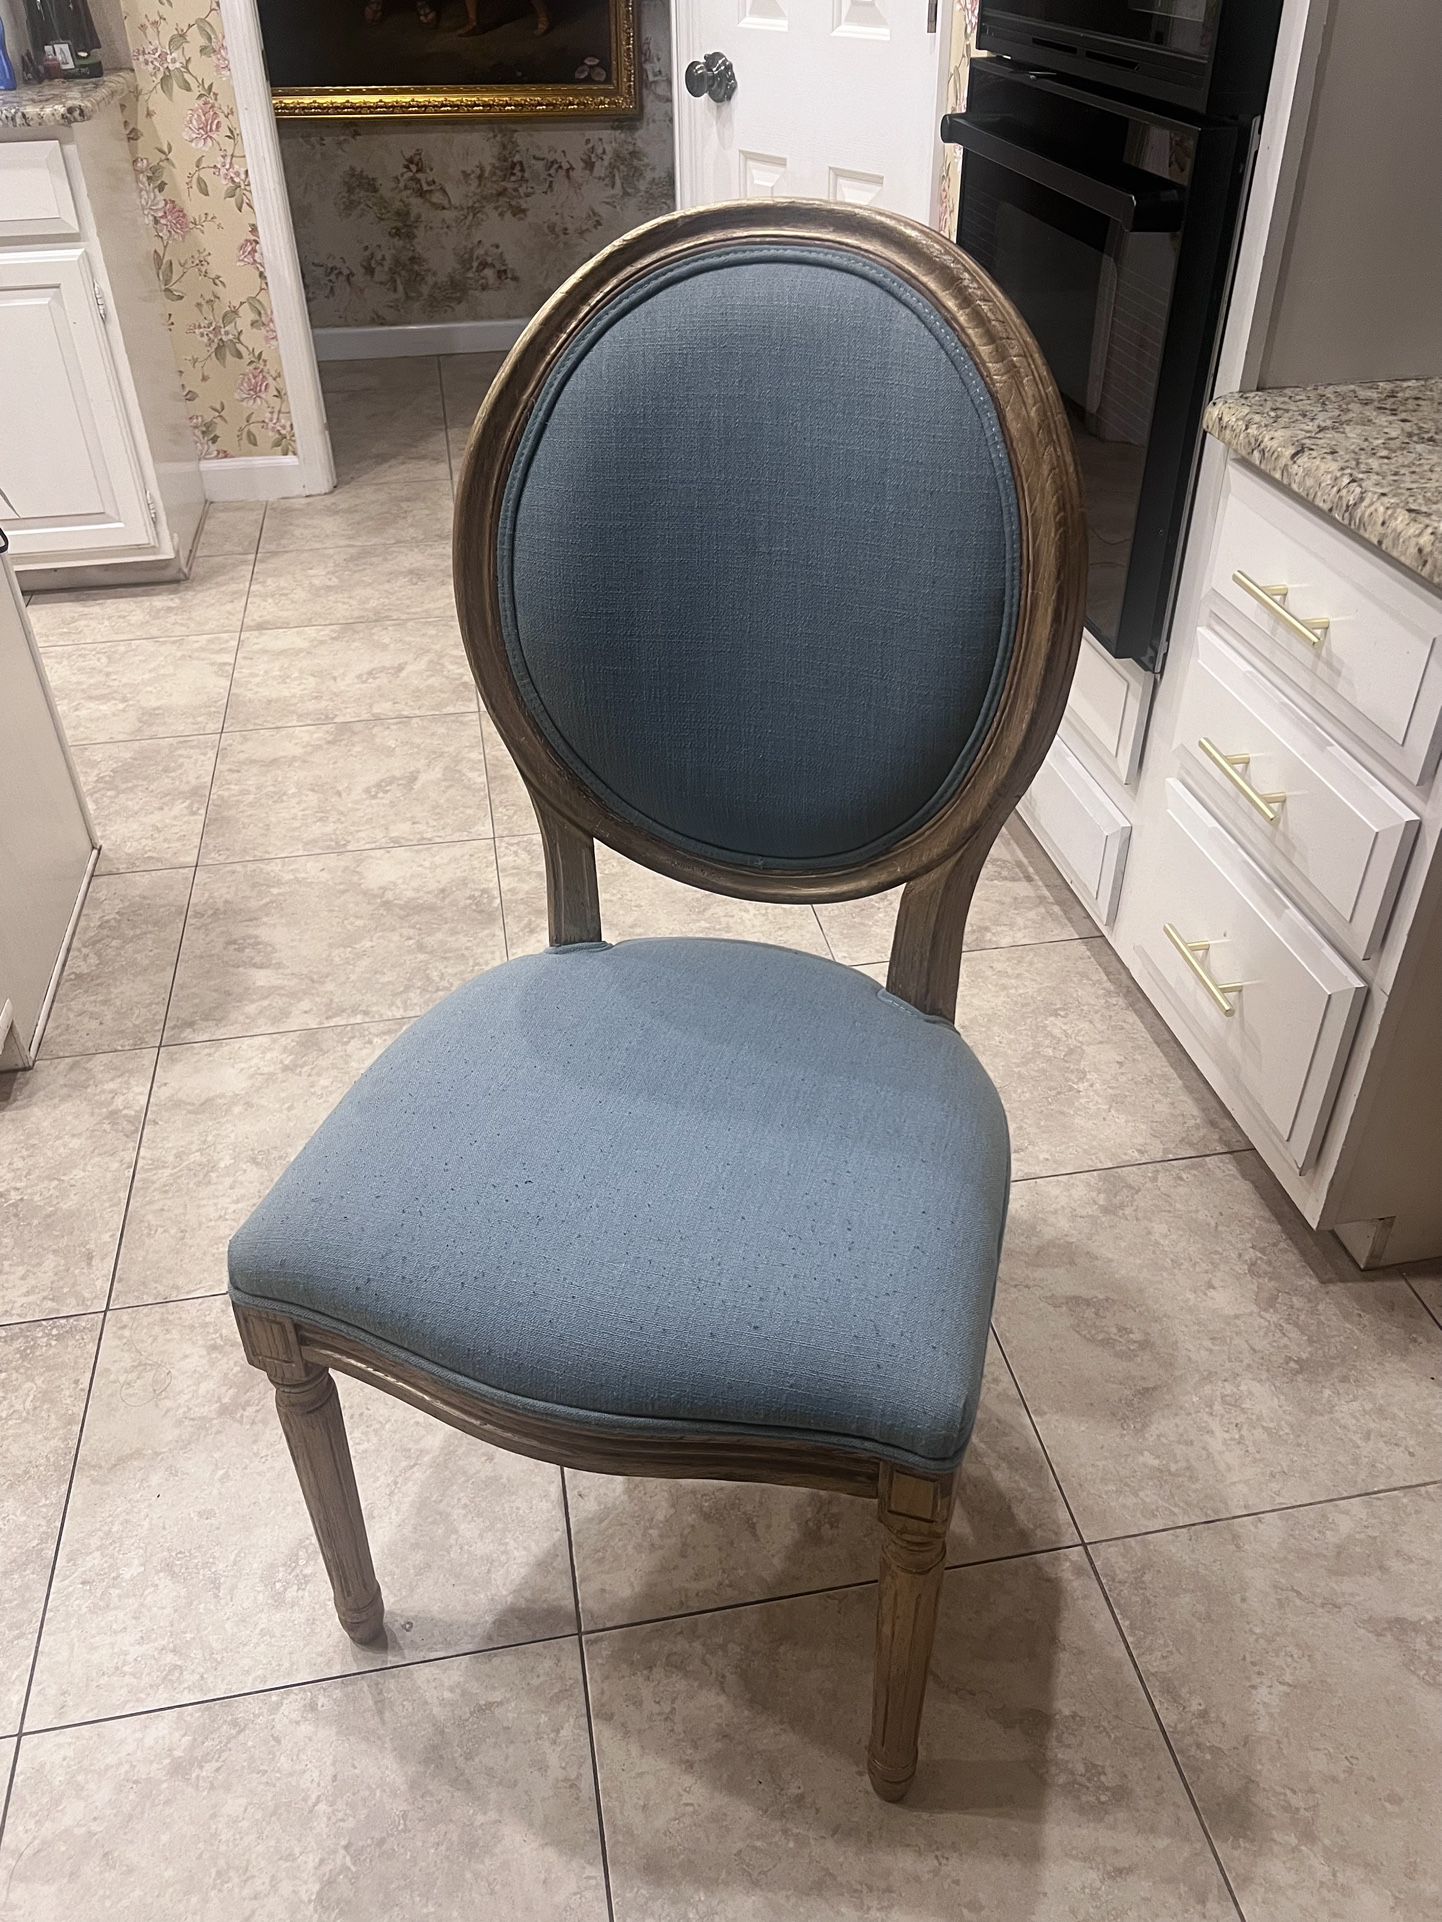 Vintage French Country Blue Chair 